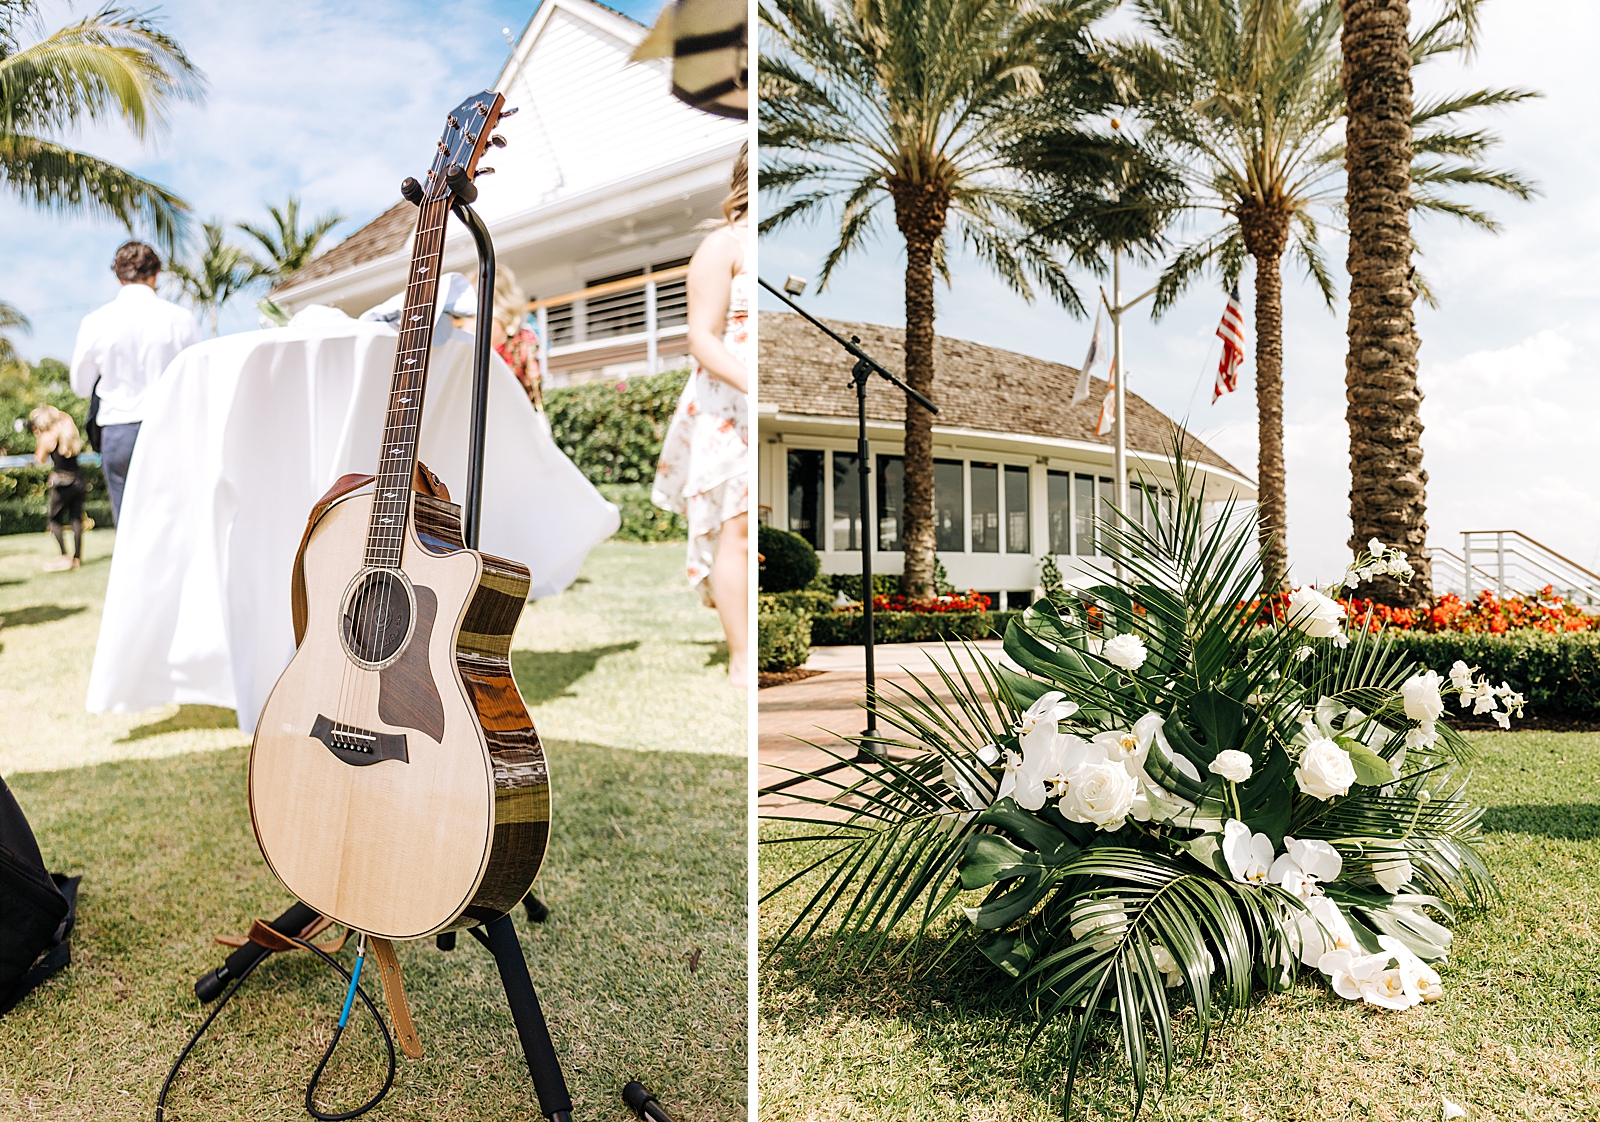 Detail shot of Guitar and flower decor for Ceremony